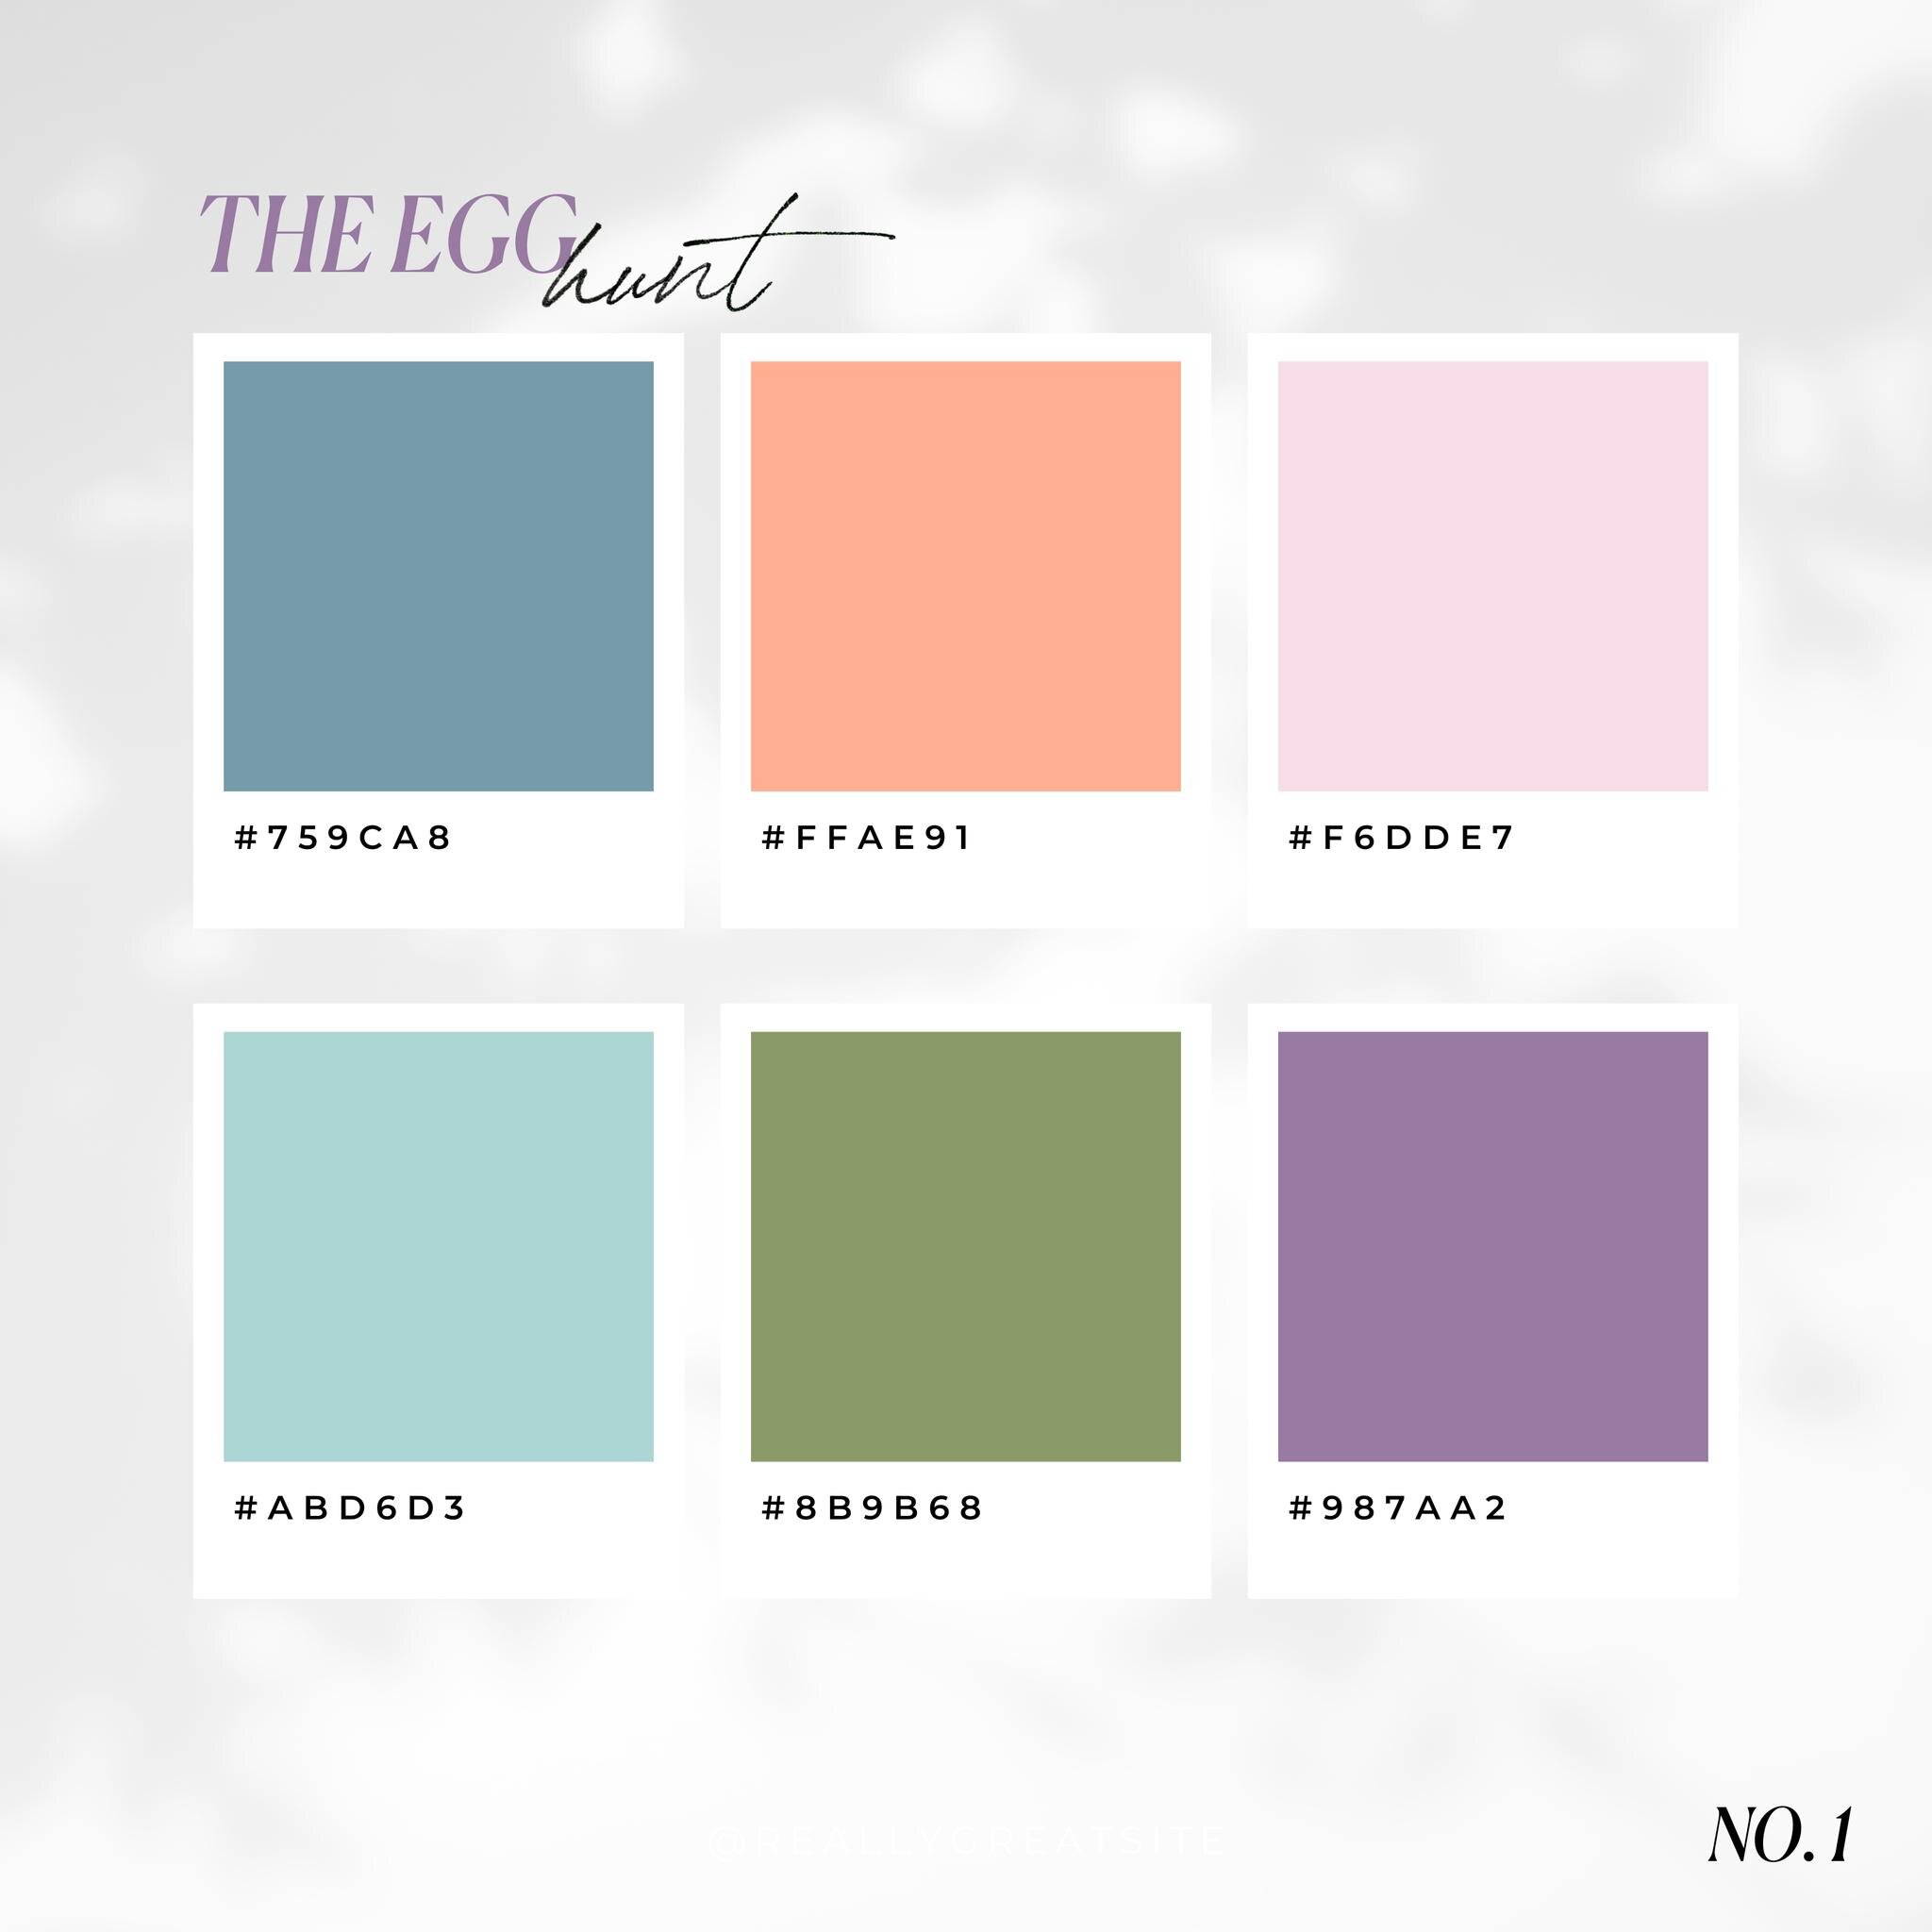 Hello, Spring! 🌿 I for one am welcome this season with open arms. It's so fitting that the sun is shining bright and beautiful in NH today. ✨

Which of these fresh color palettes speaks to your springtime mood?